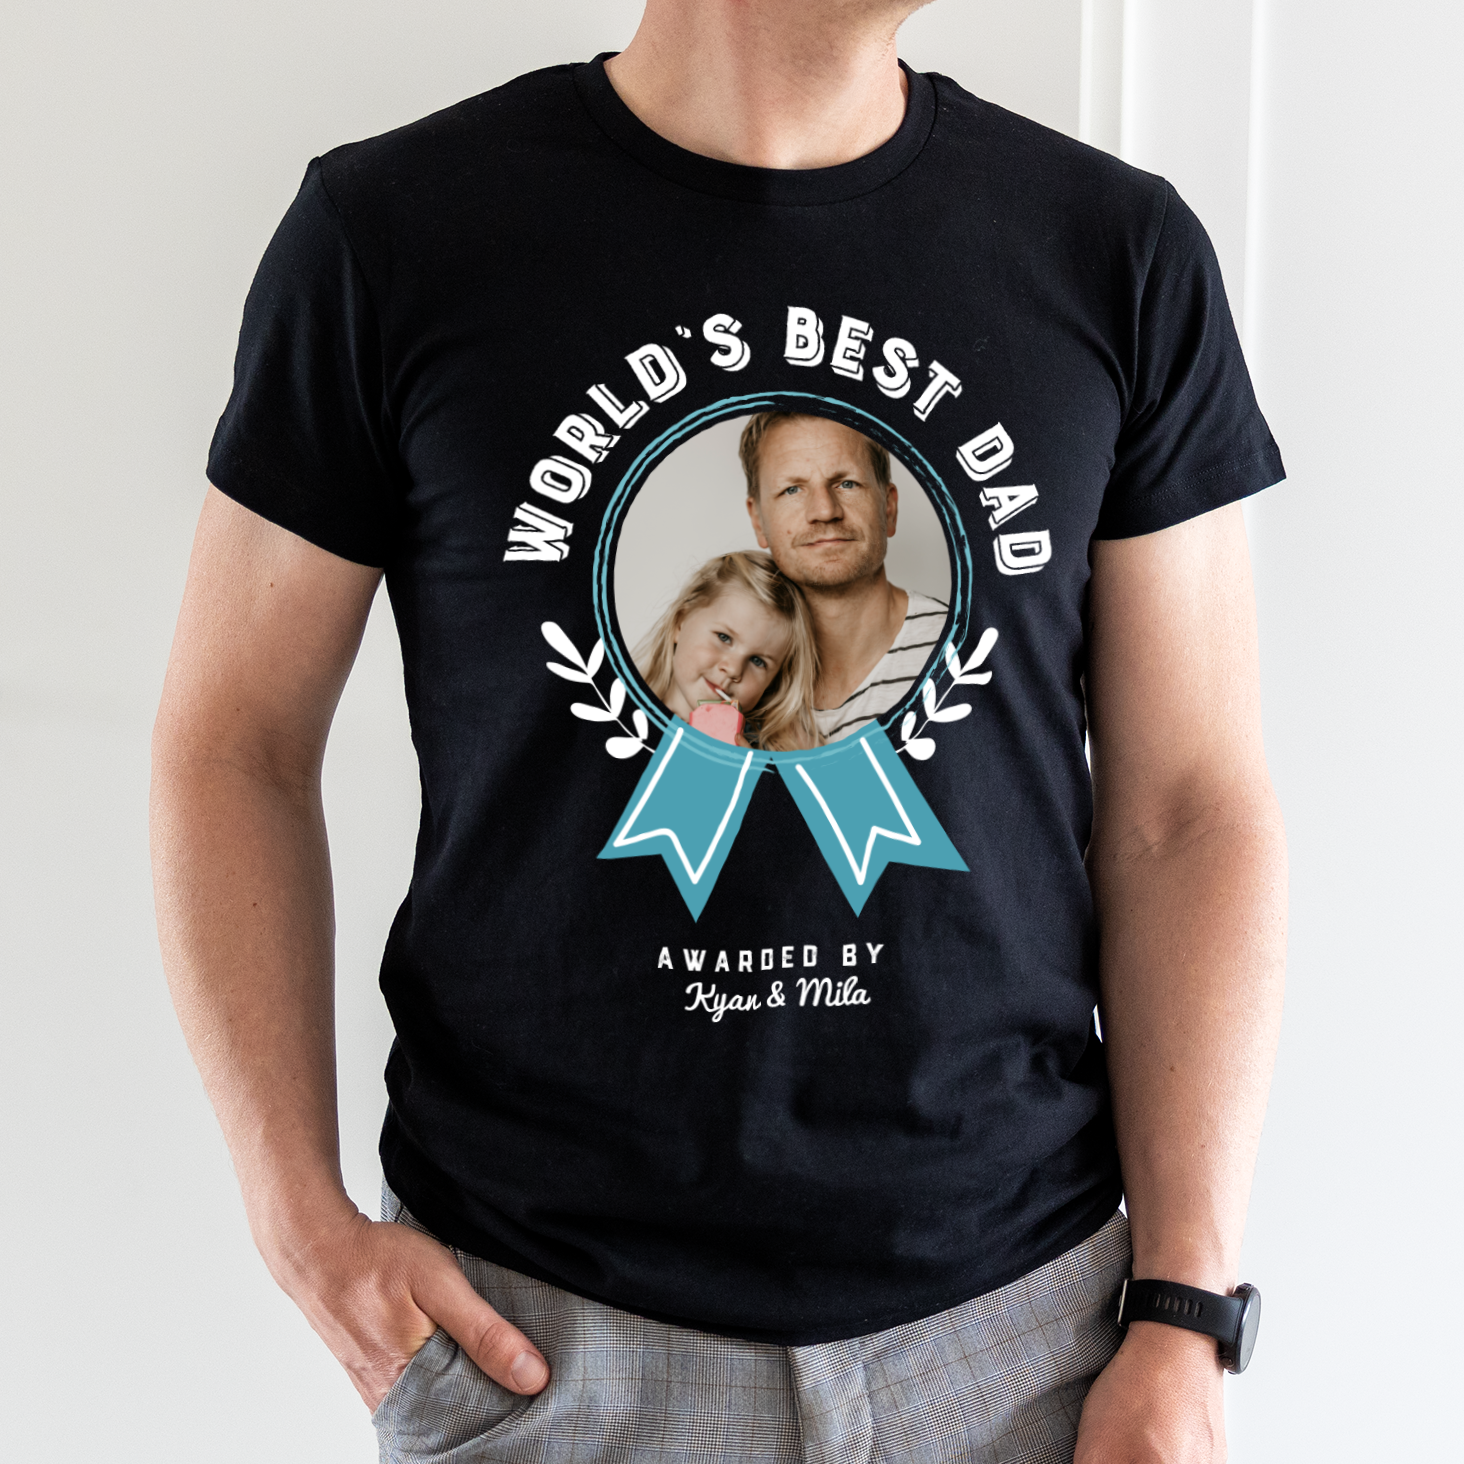 Personalised t-shirt - Father's Day - Black - M